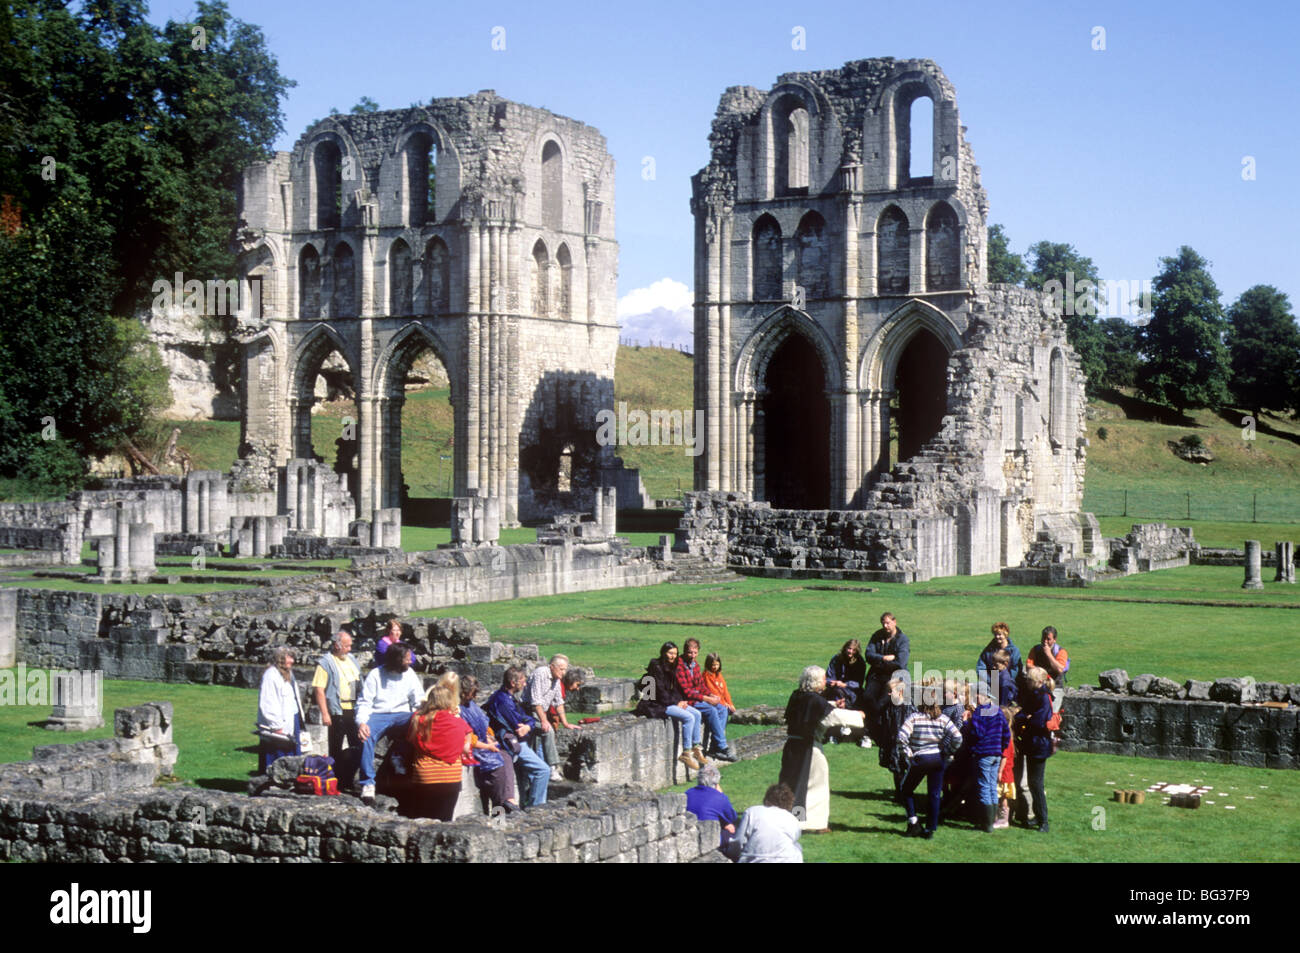 Roche Abbey, Yorkshire with visitors, English abbeys monasteries ruins ruined medieval Cistercian Order tourists tourism people Stock Photo